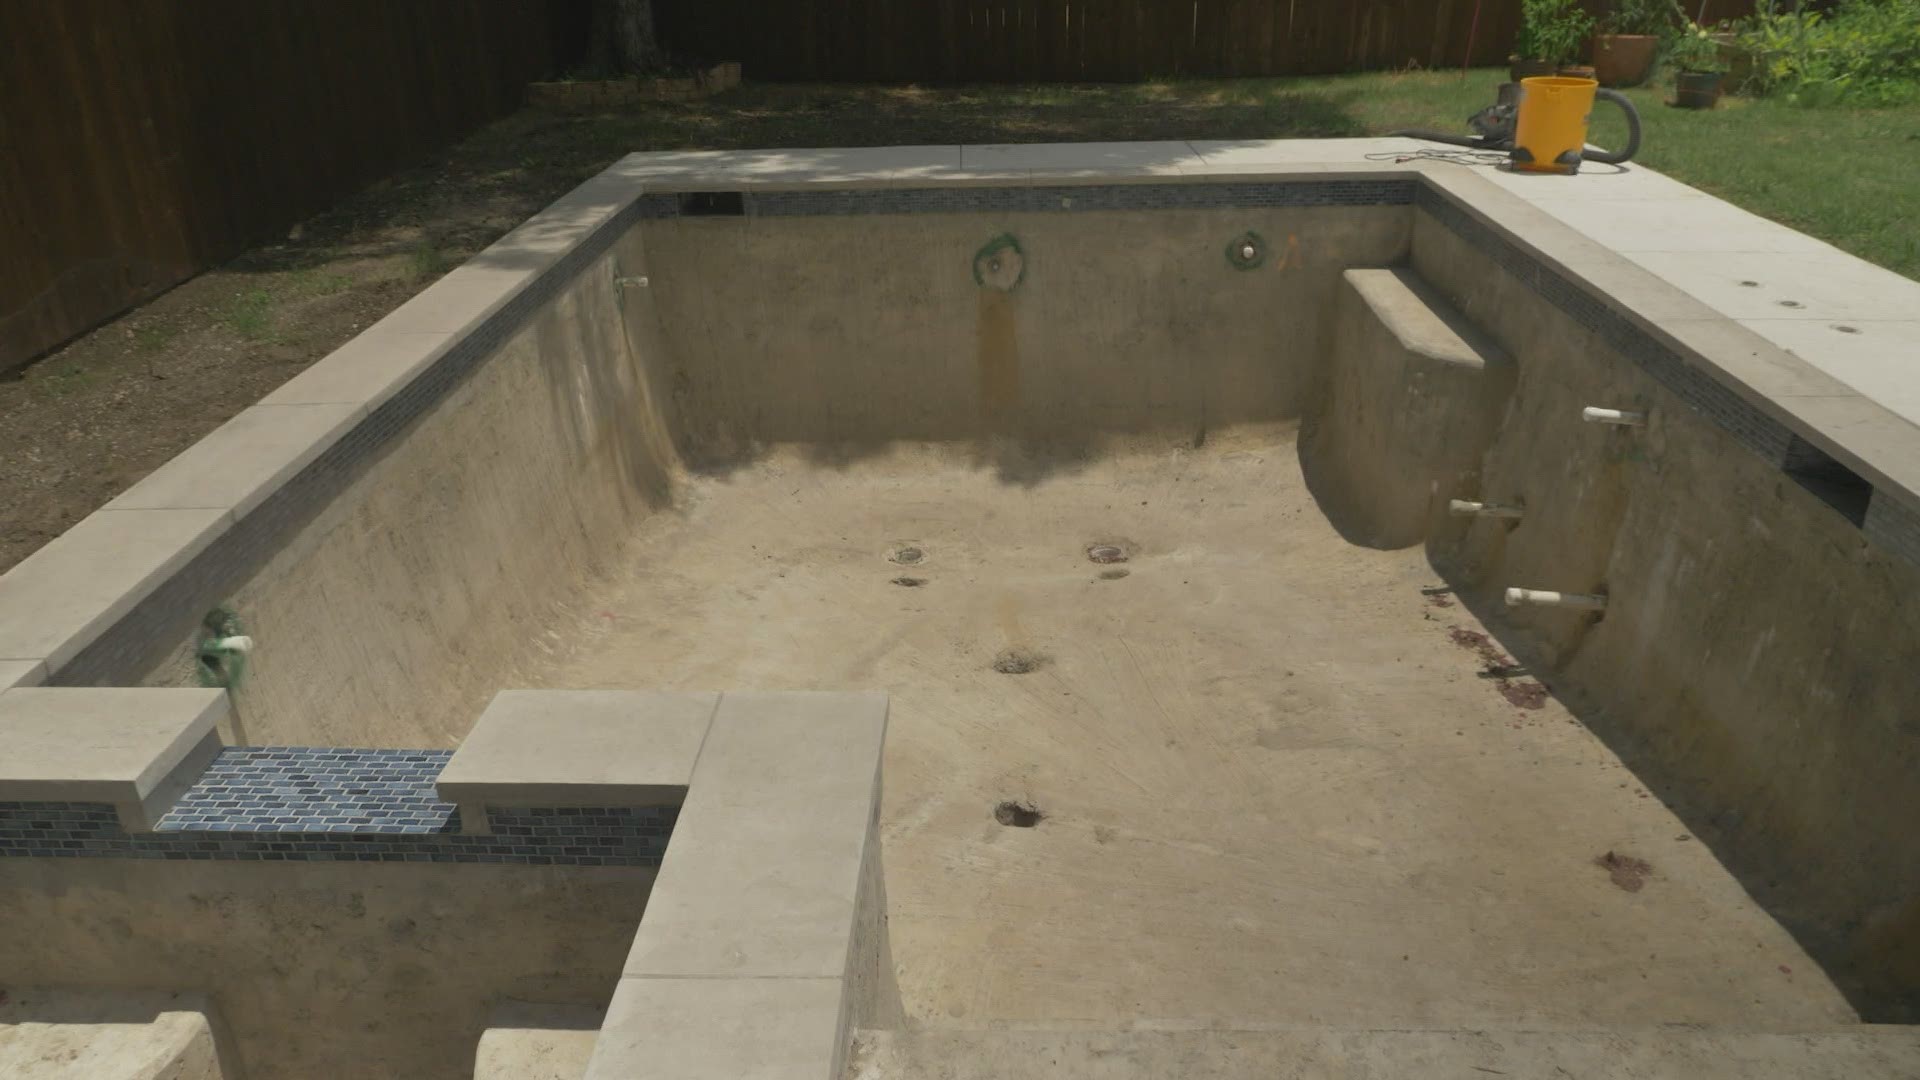 Nearly 10 months later, all MacKenzie McCarver has is this unfinished hole with no idea when the pool will be finished.